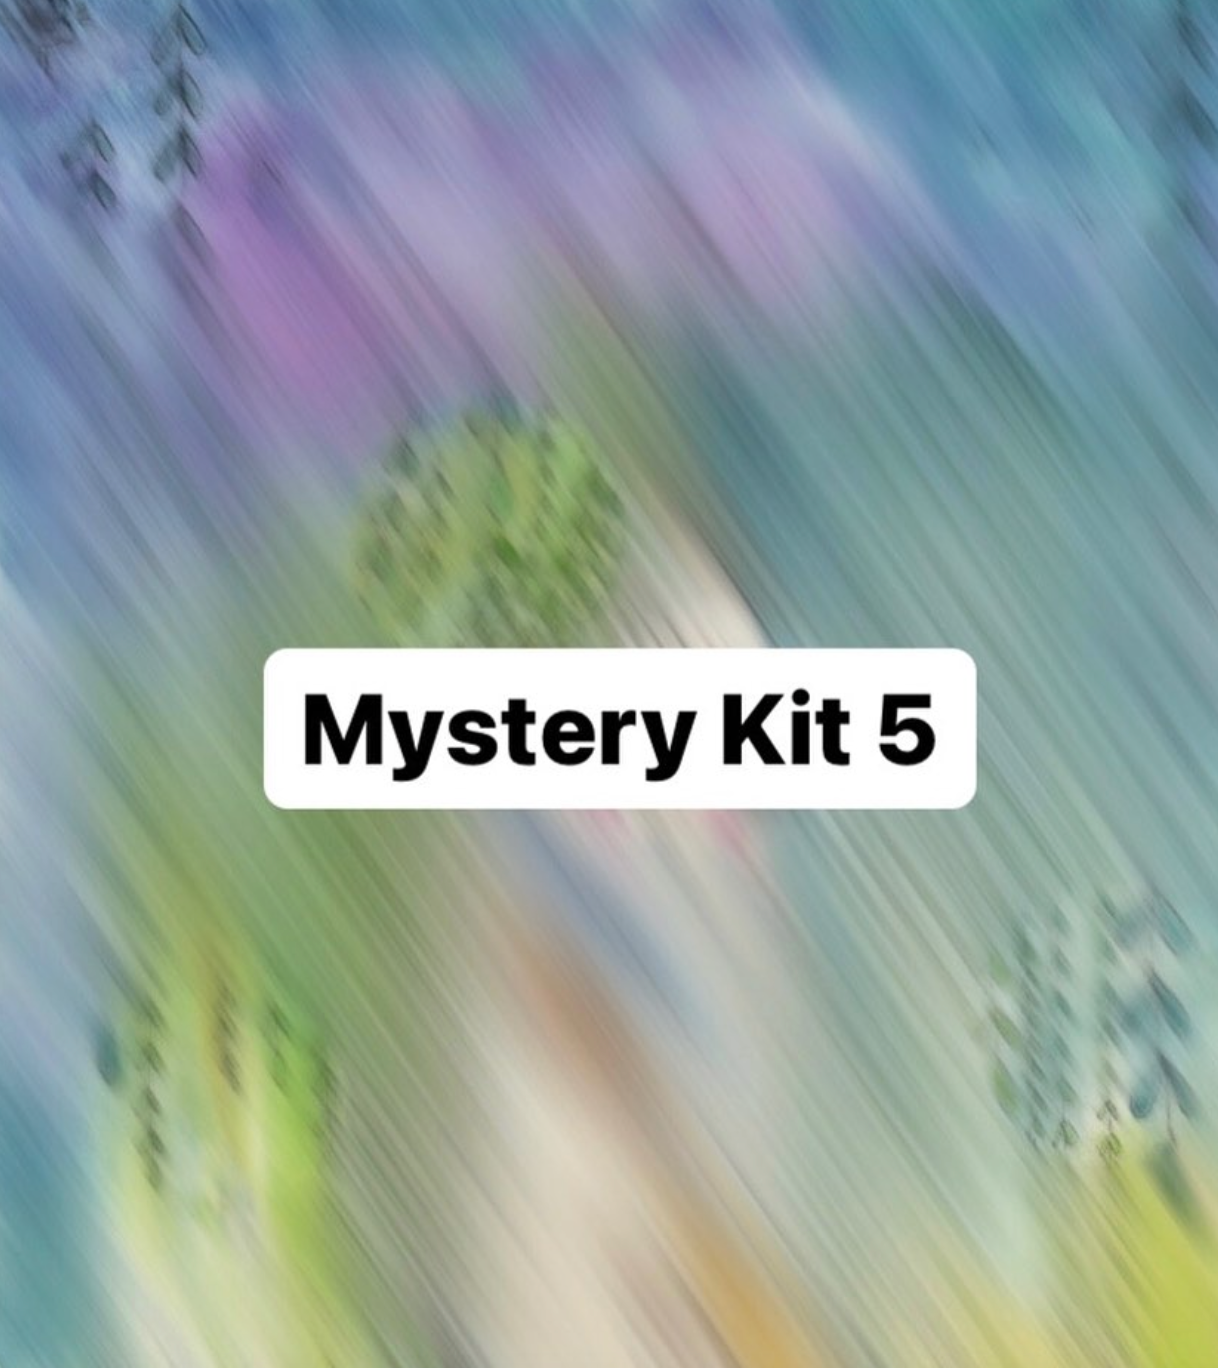 Mystery Kit 5 (Limited Edition)